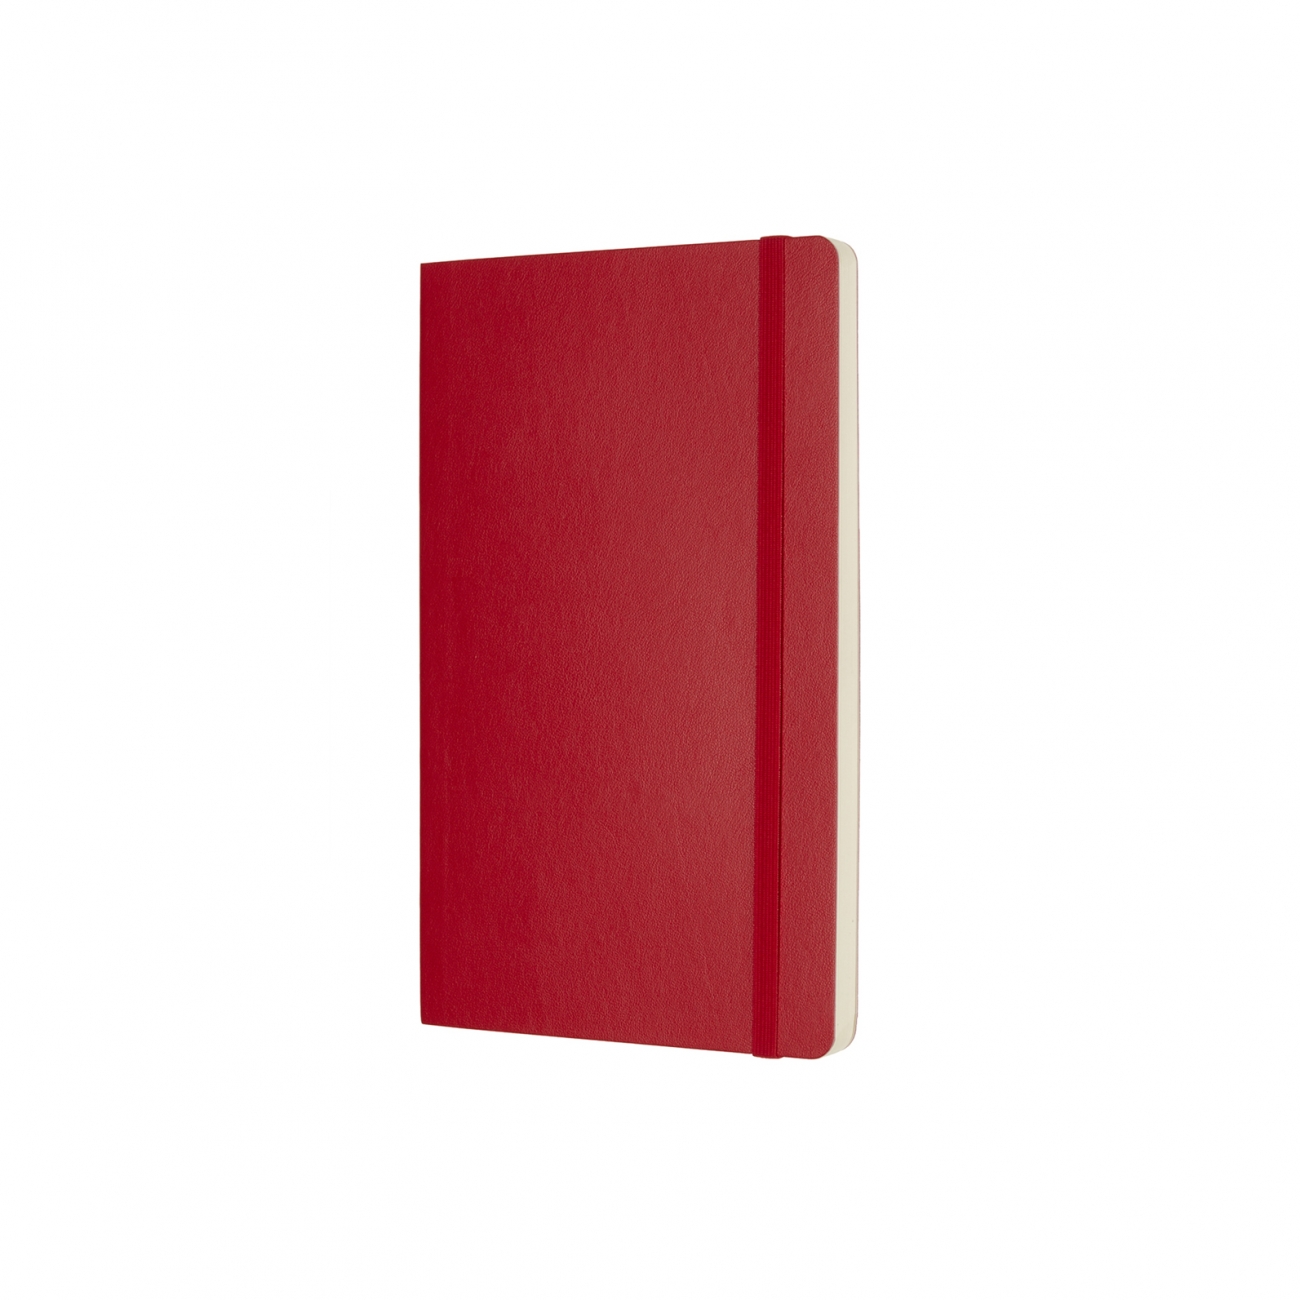 CLASSIC SOFT COVER NOTEBOOK - PLAIN - LARGE - SCARLET RED